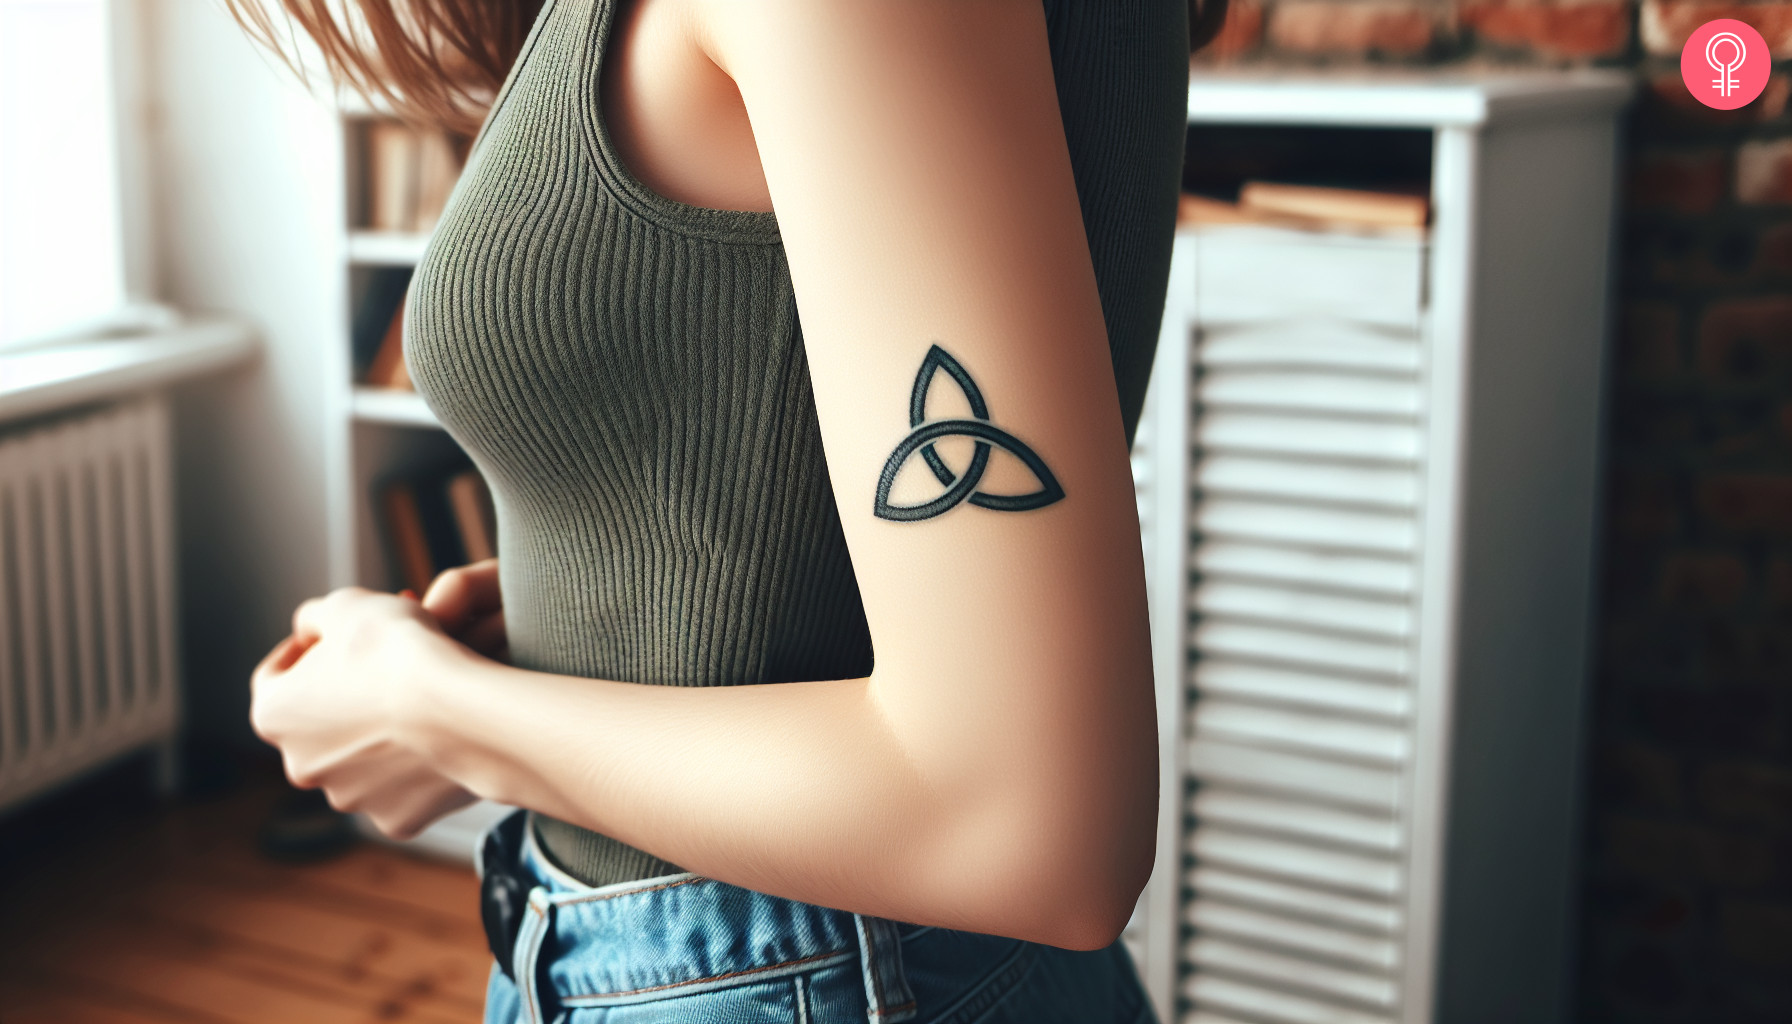 Simple trinity knot tattoo on the upper arm of a woman